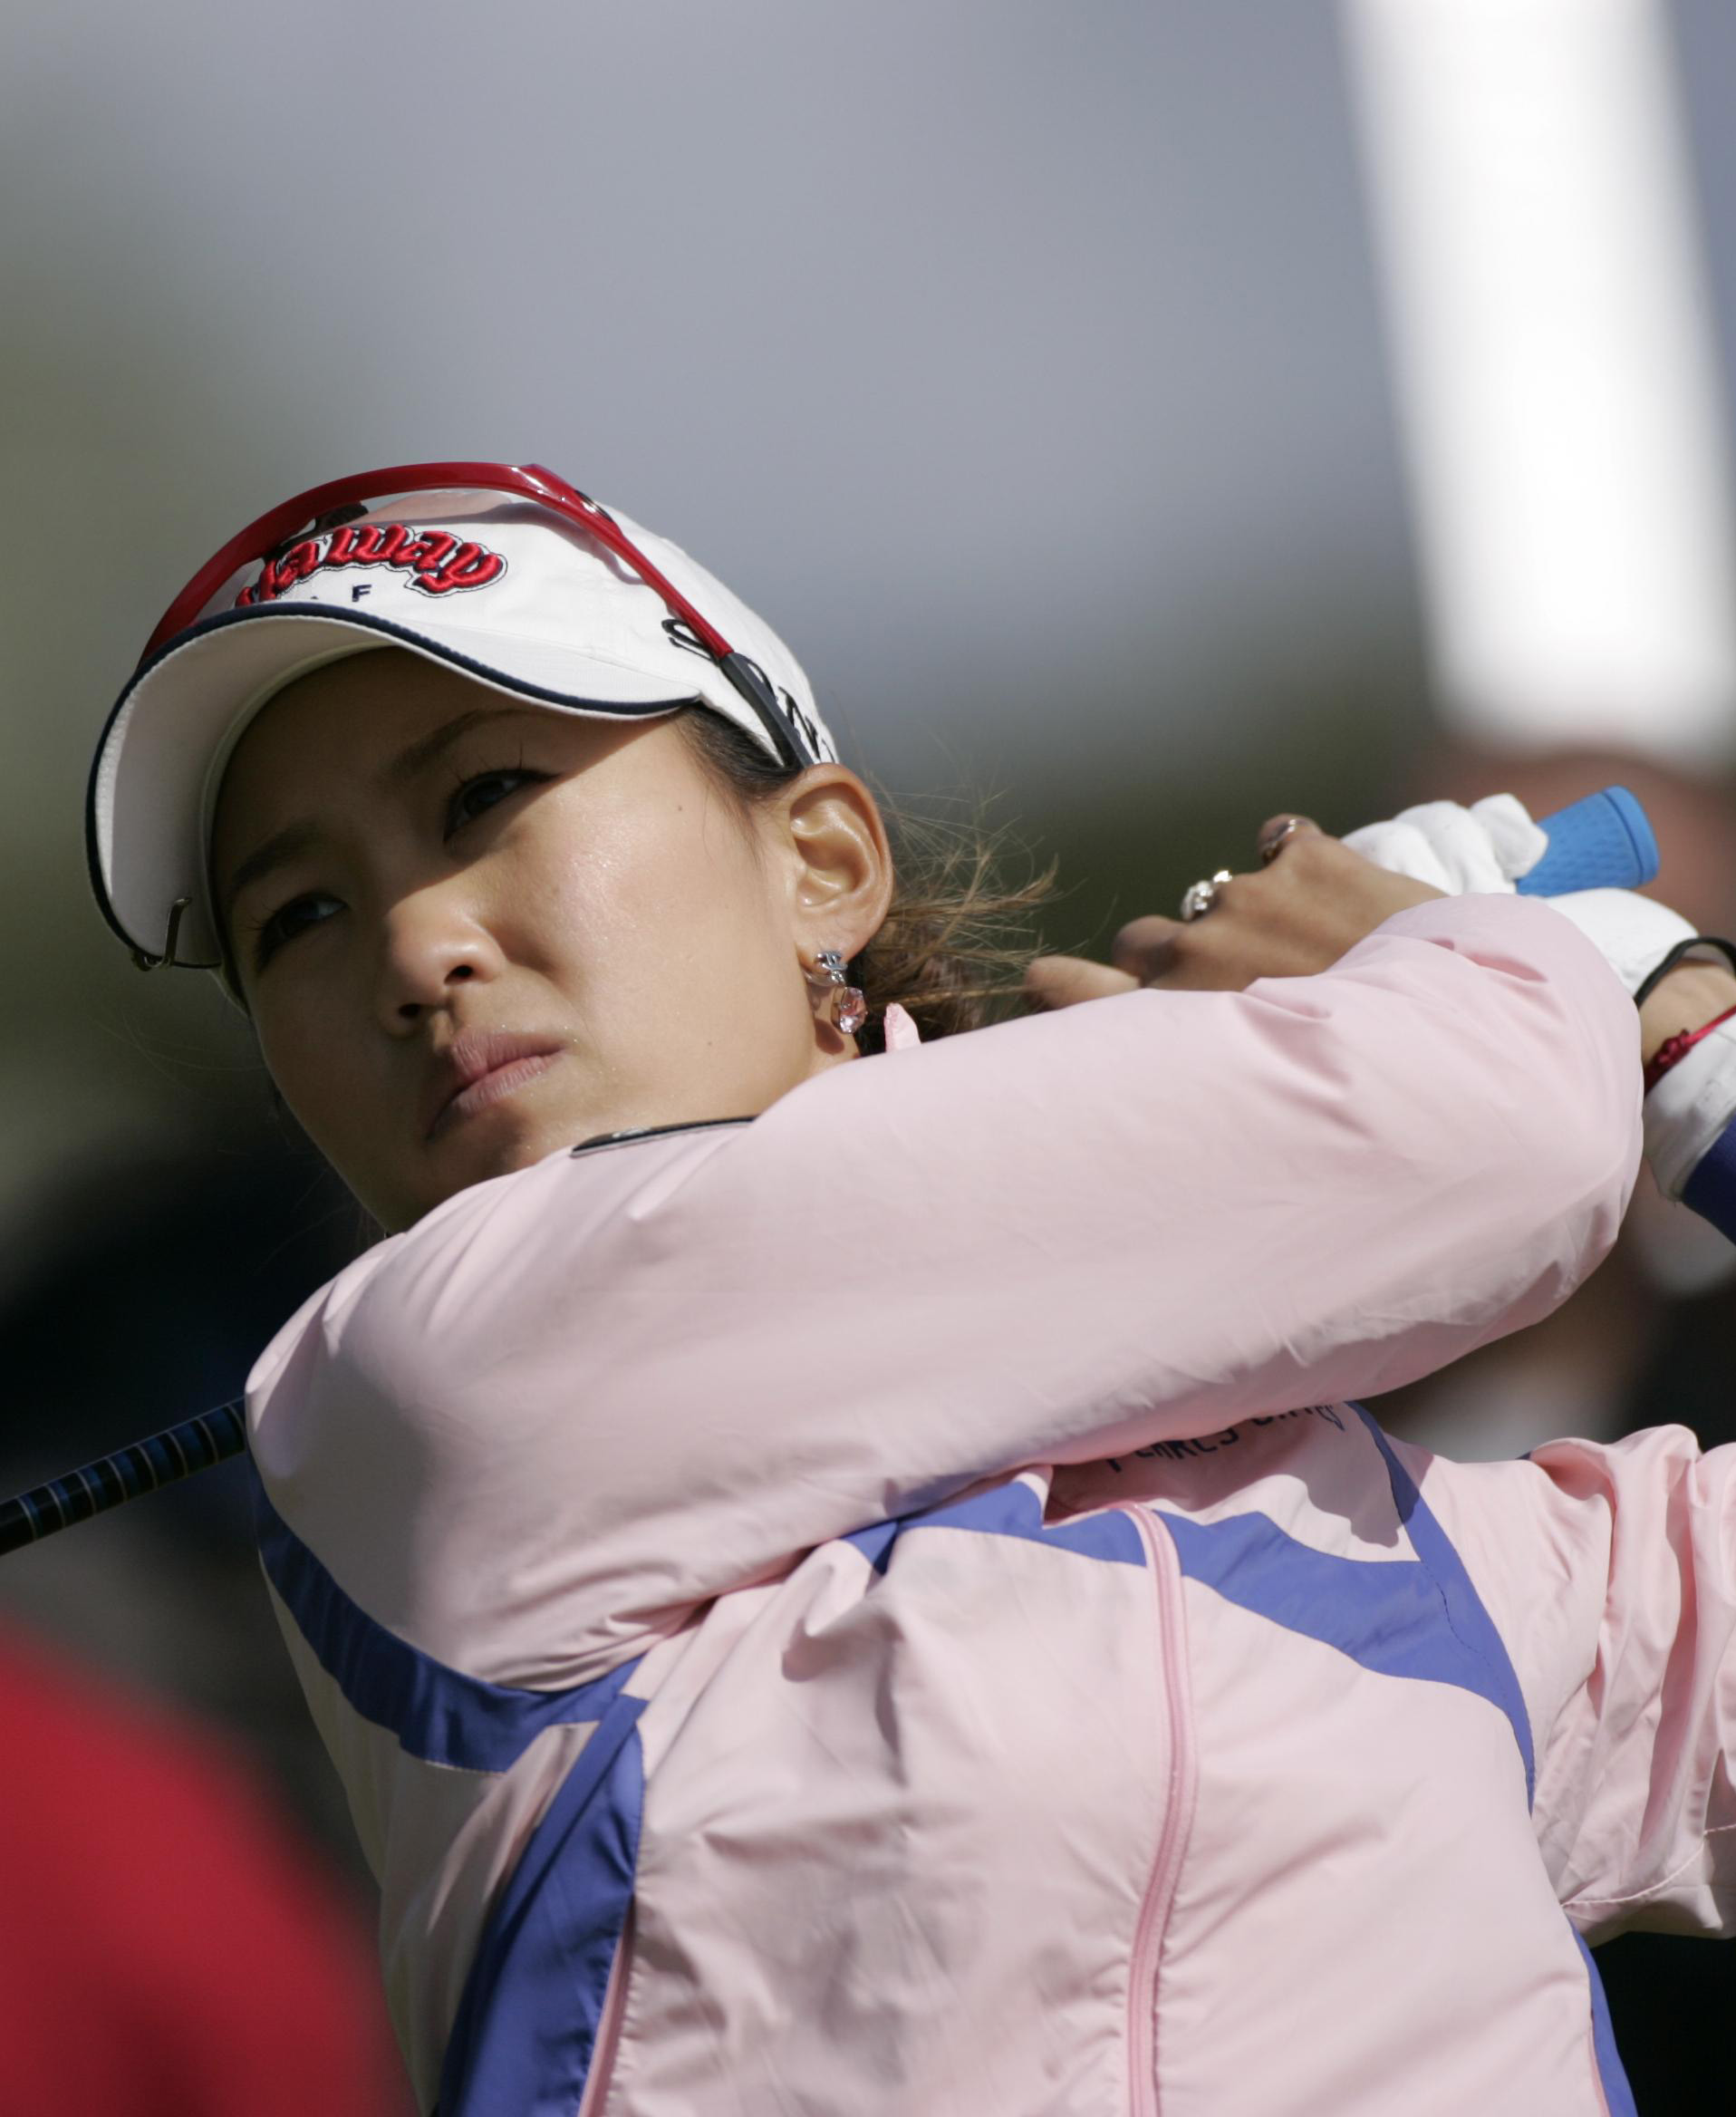 Archive: Momoko Ueda (above)played in the 2009 US Open when a possible rule breach only came to the attention of the committee after the results were announced